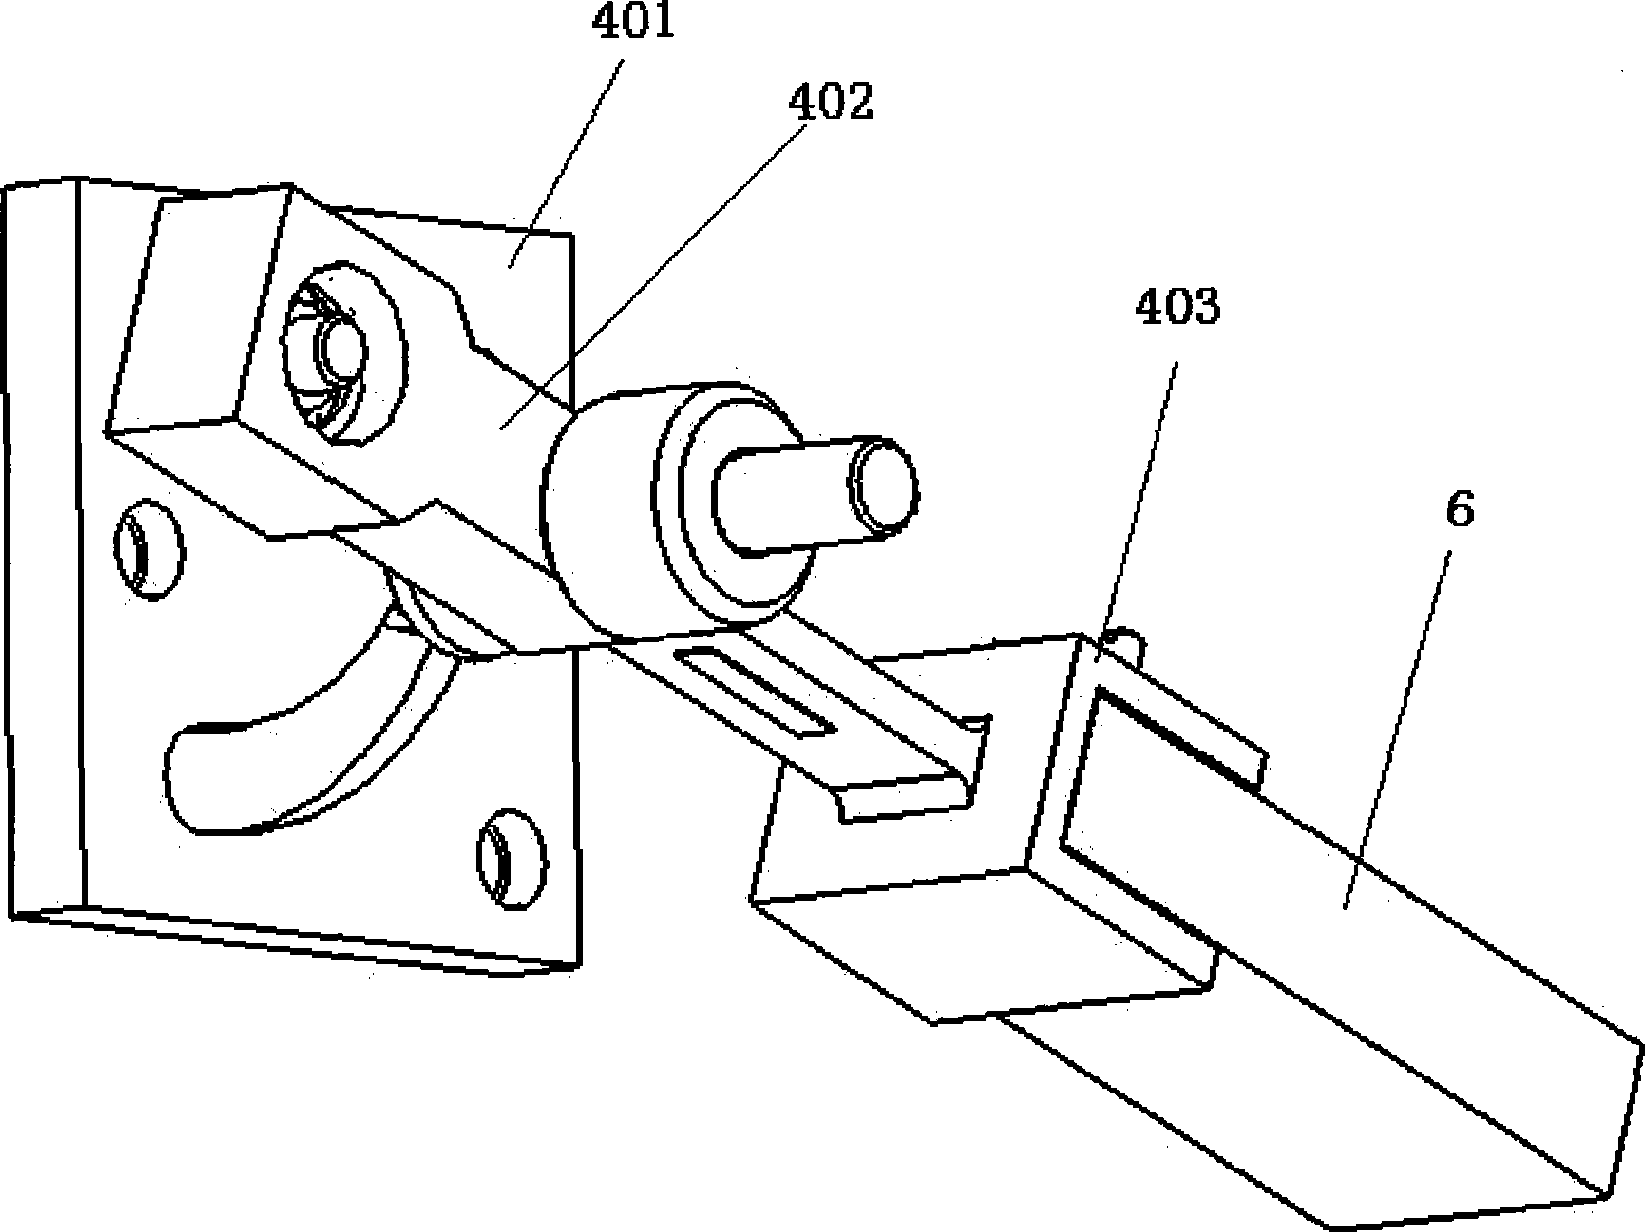 Tester for single-particle intrusion into relative interface